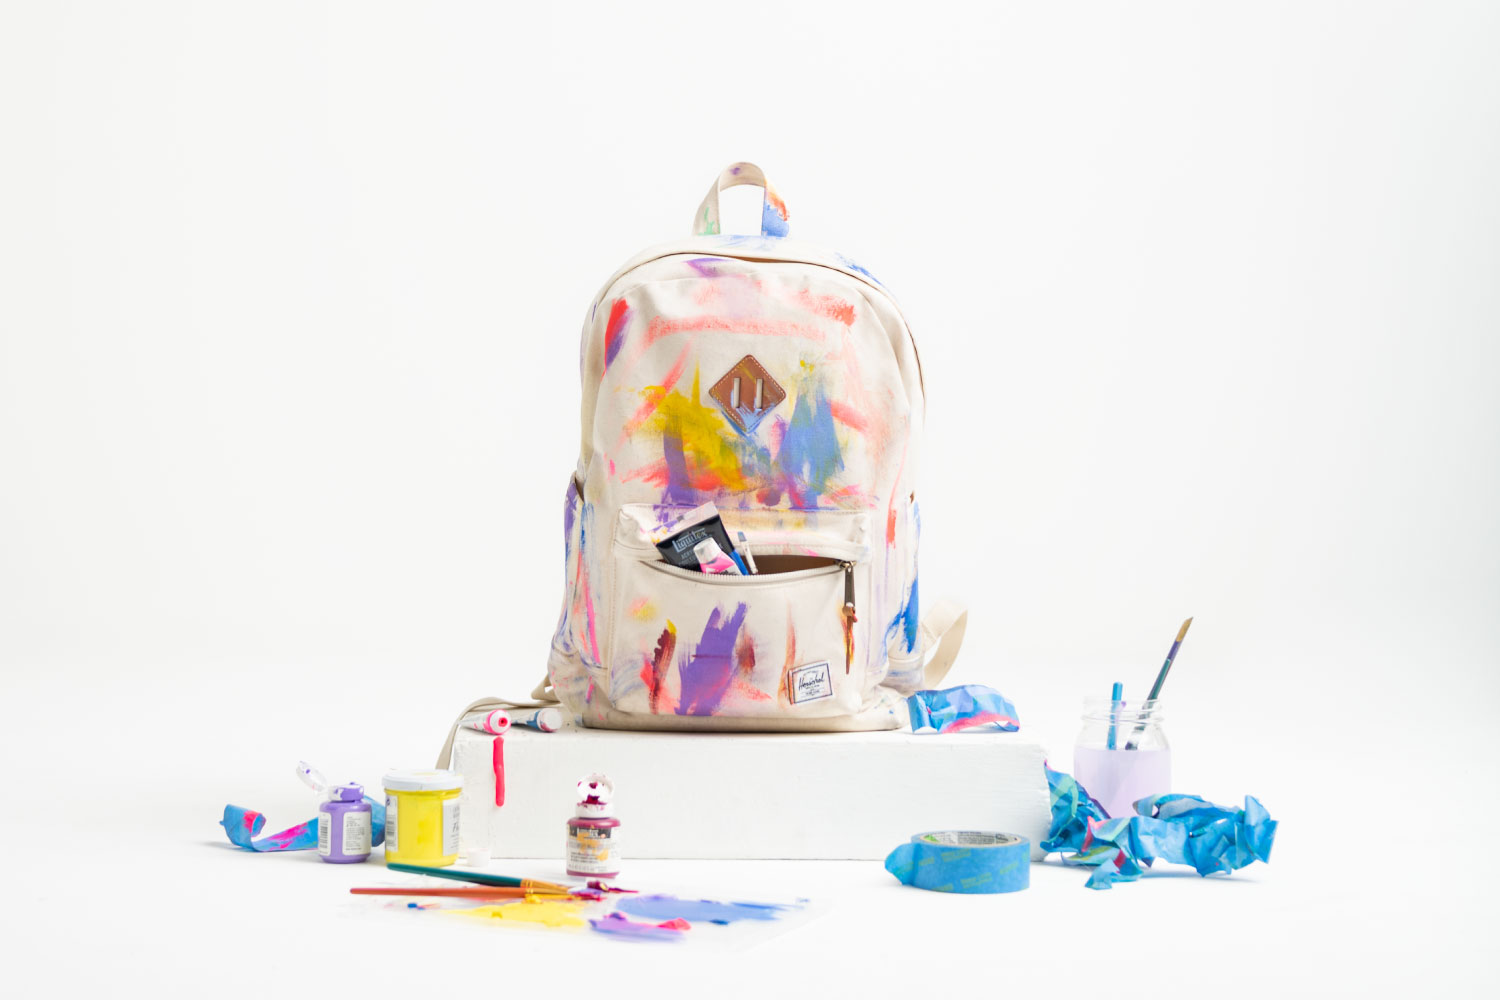 A Herschel Heavyweight Canvas Heritage Backpack in Natural covered in bright coloured paint next to a variety of painting utensils and paints